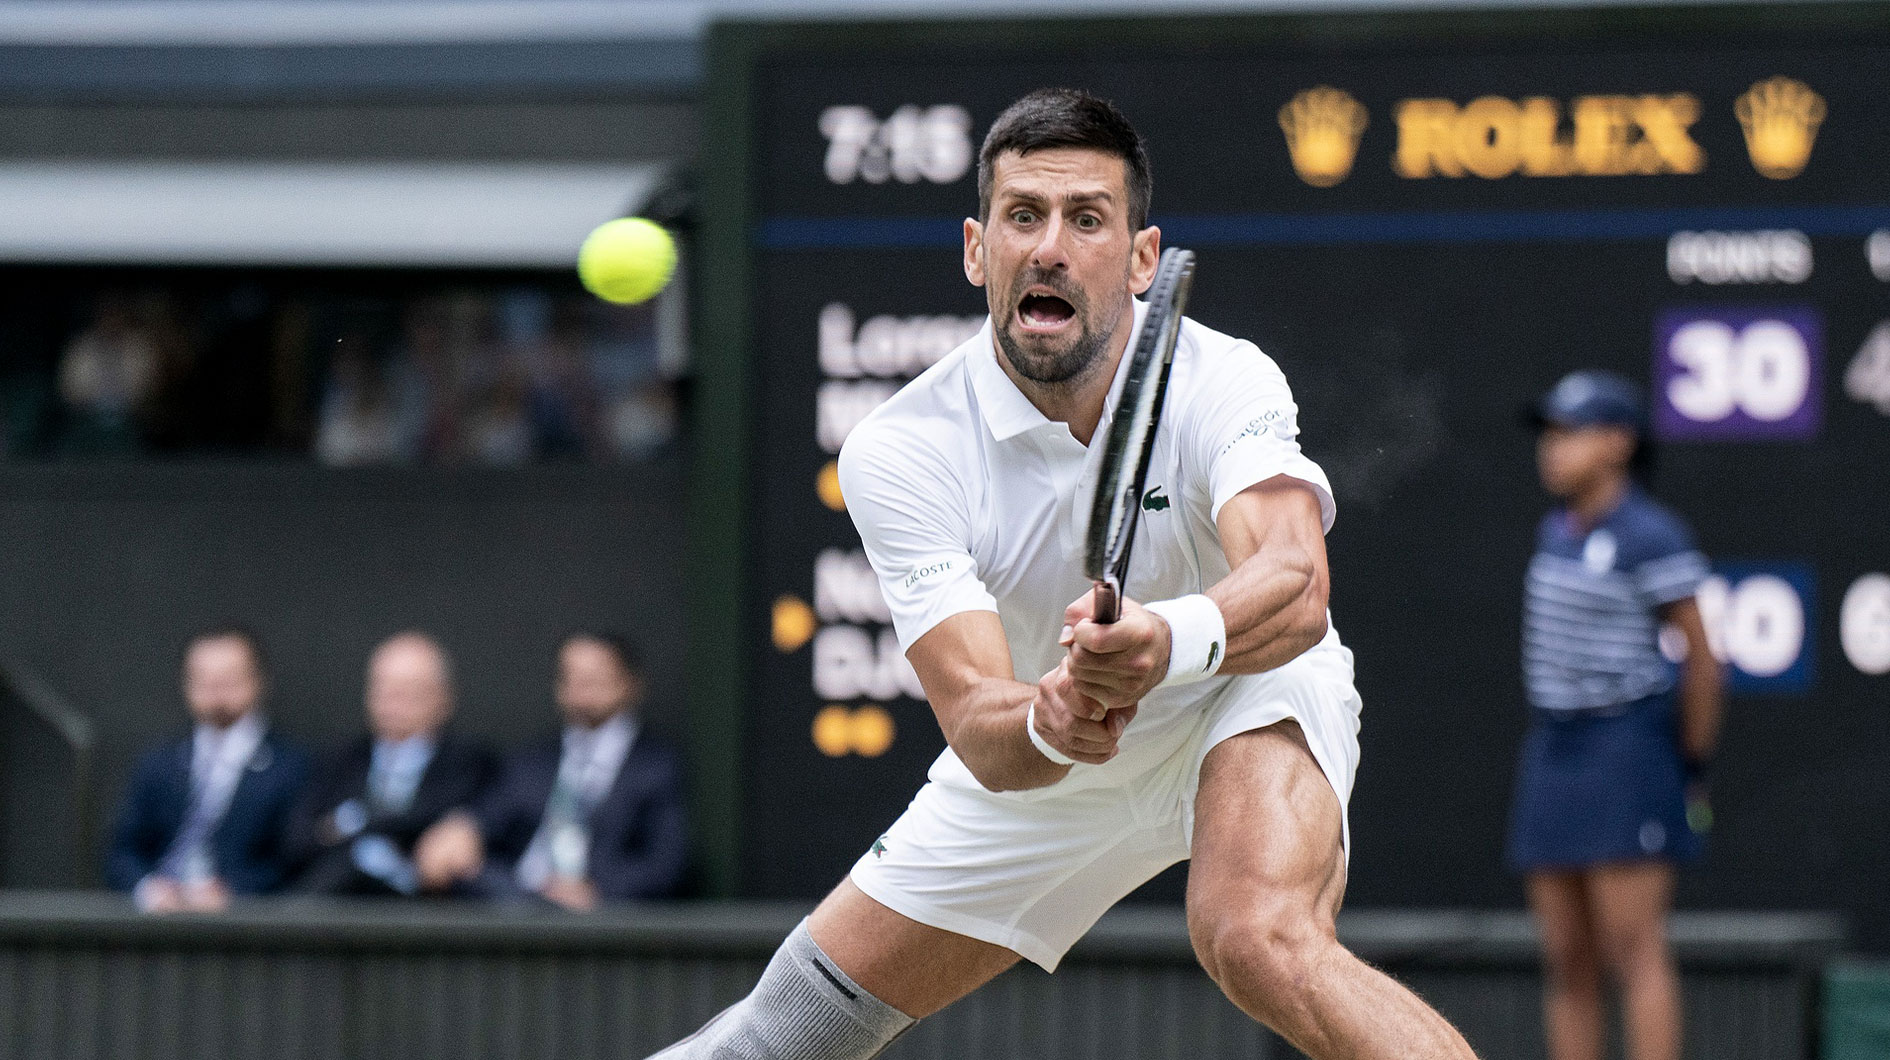 Novak Djokovic of Serbia returns a shot during his match against Lorenzo Musetti of Italy on day 12 at All England Lawn Tennis and Croquet Club.